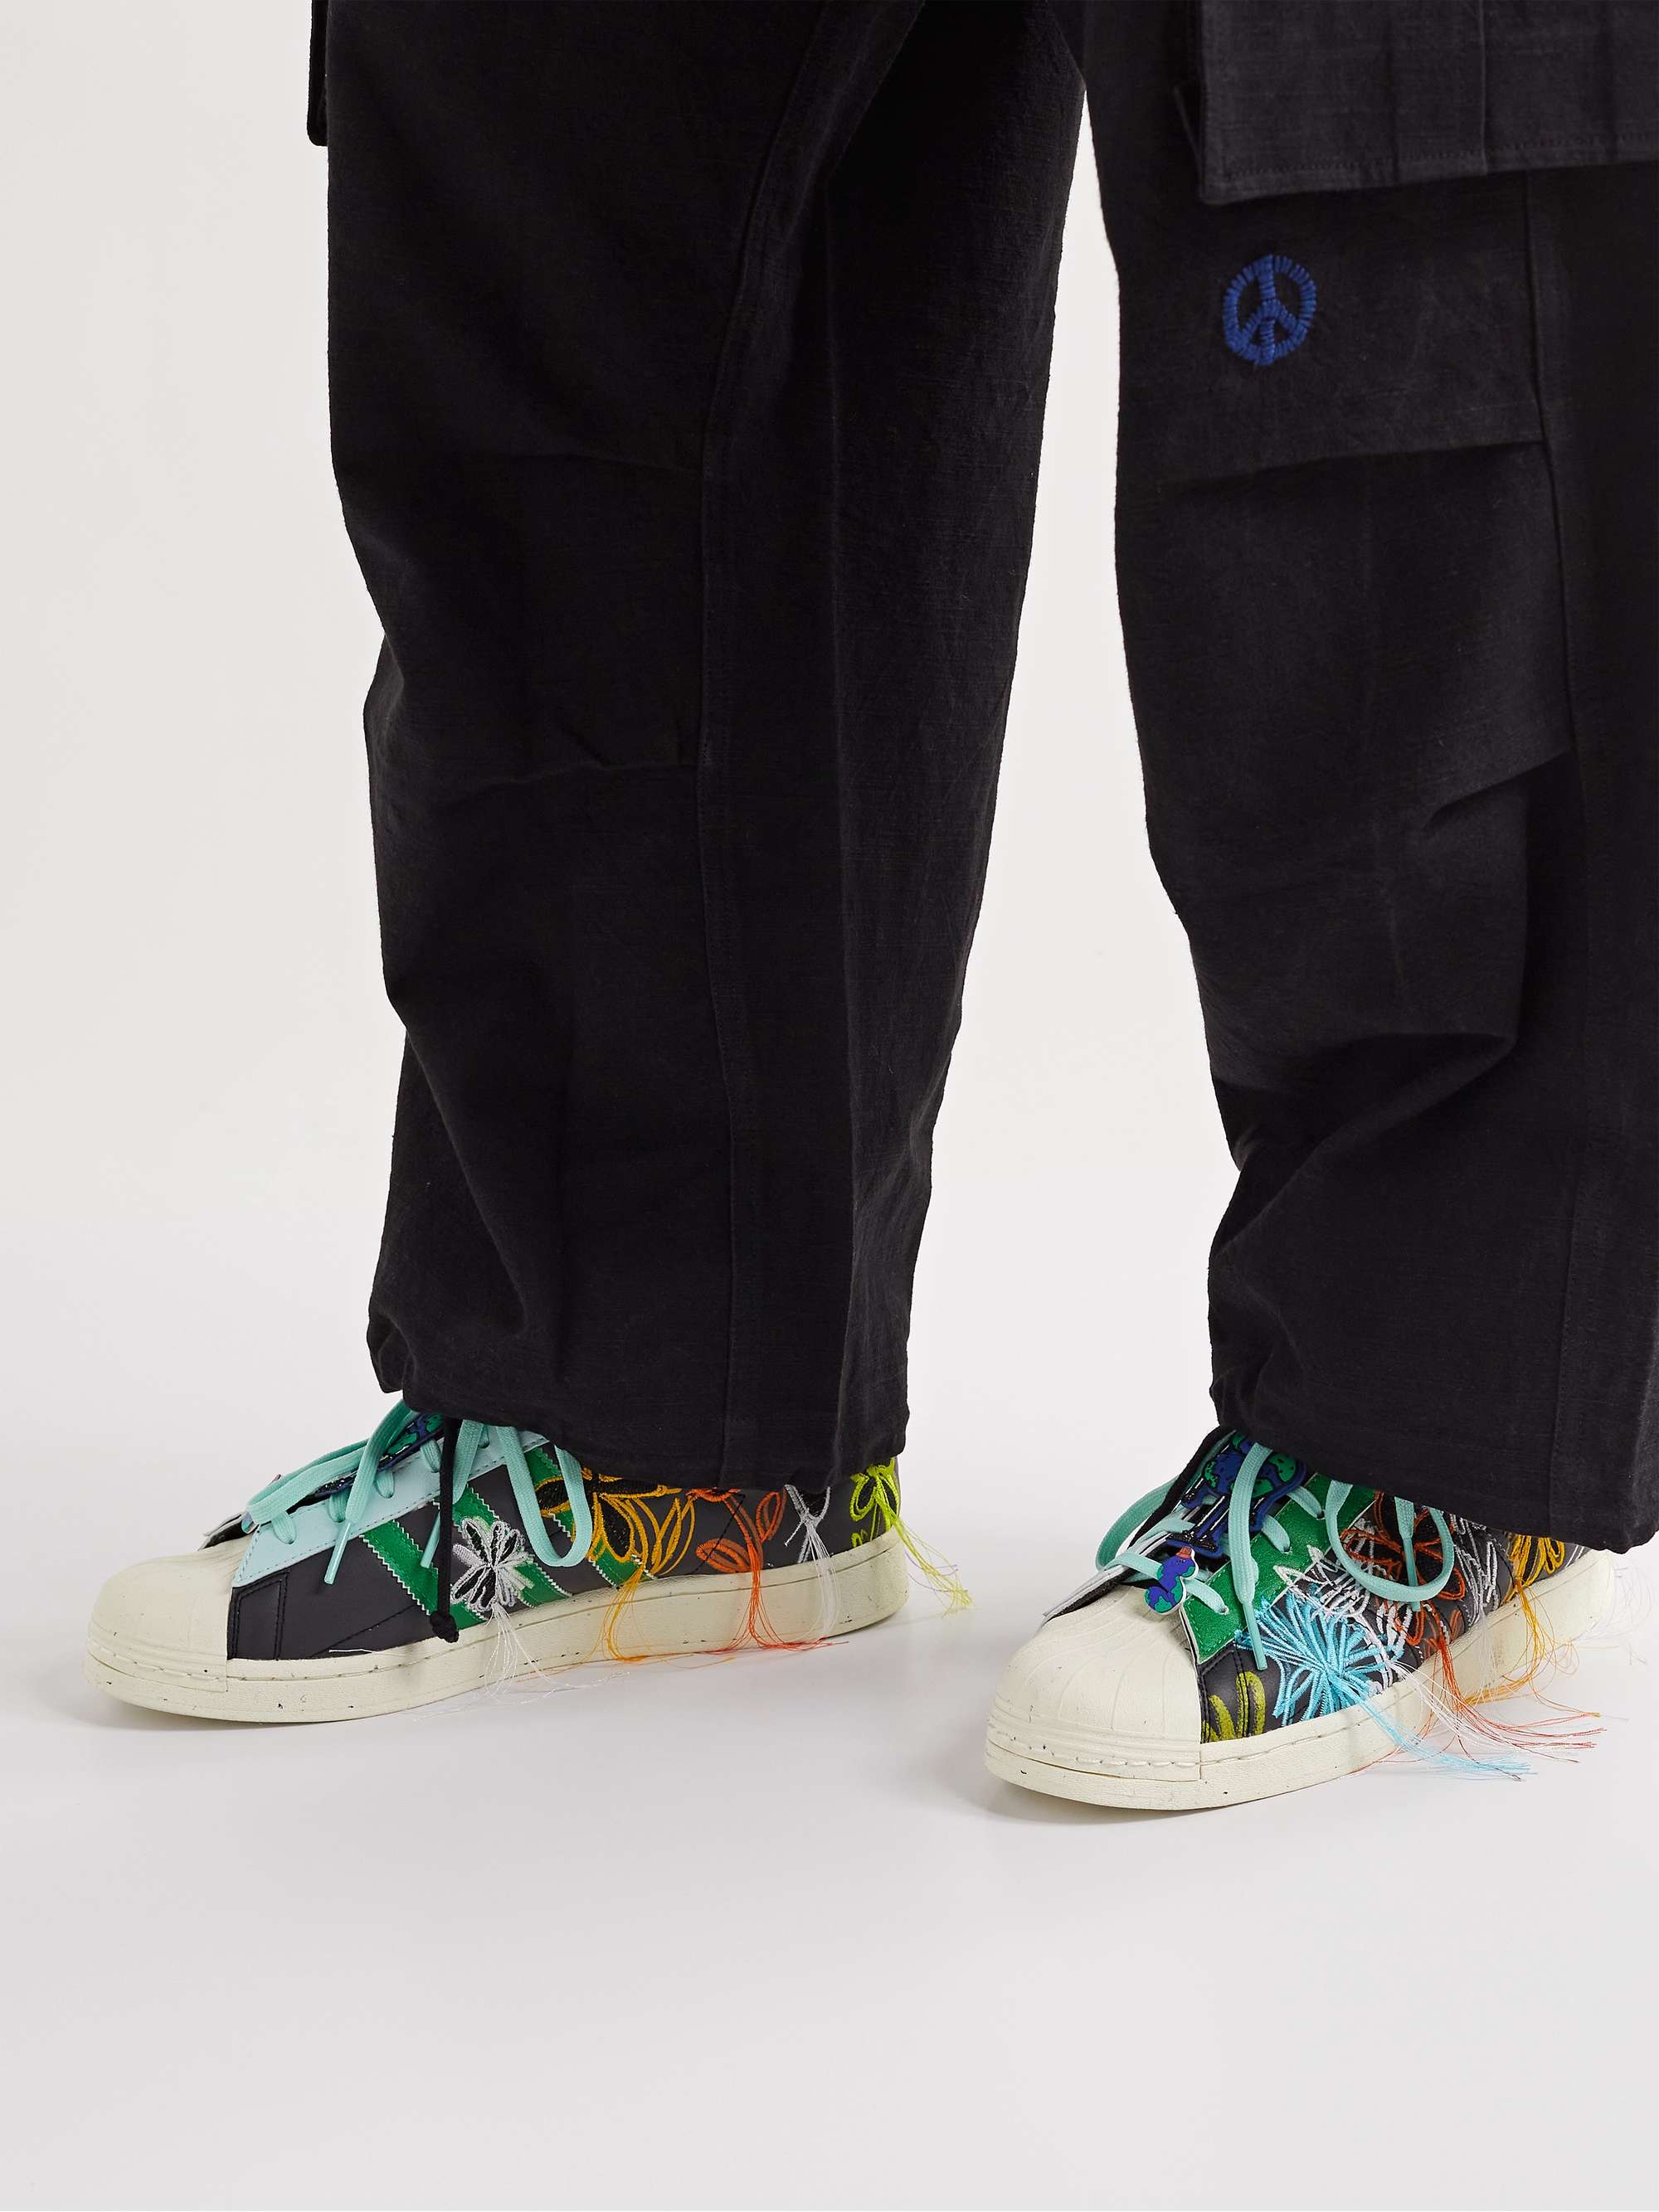 ADIDAS CONSORTIUM + Sean Wotherspoon SUPEREARTH Superstar Embroidered Faux Leather Sneakers